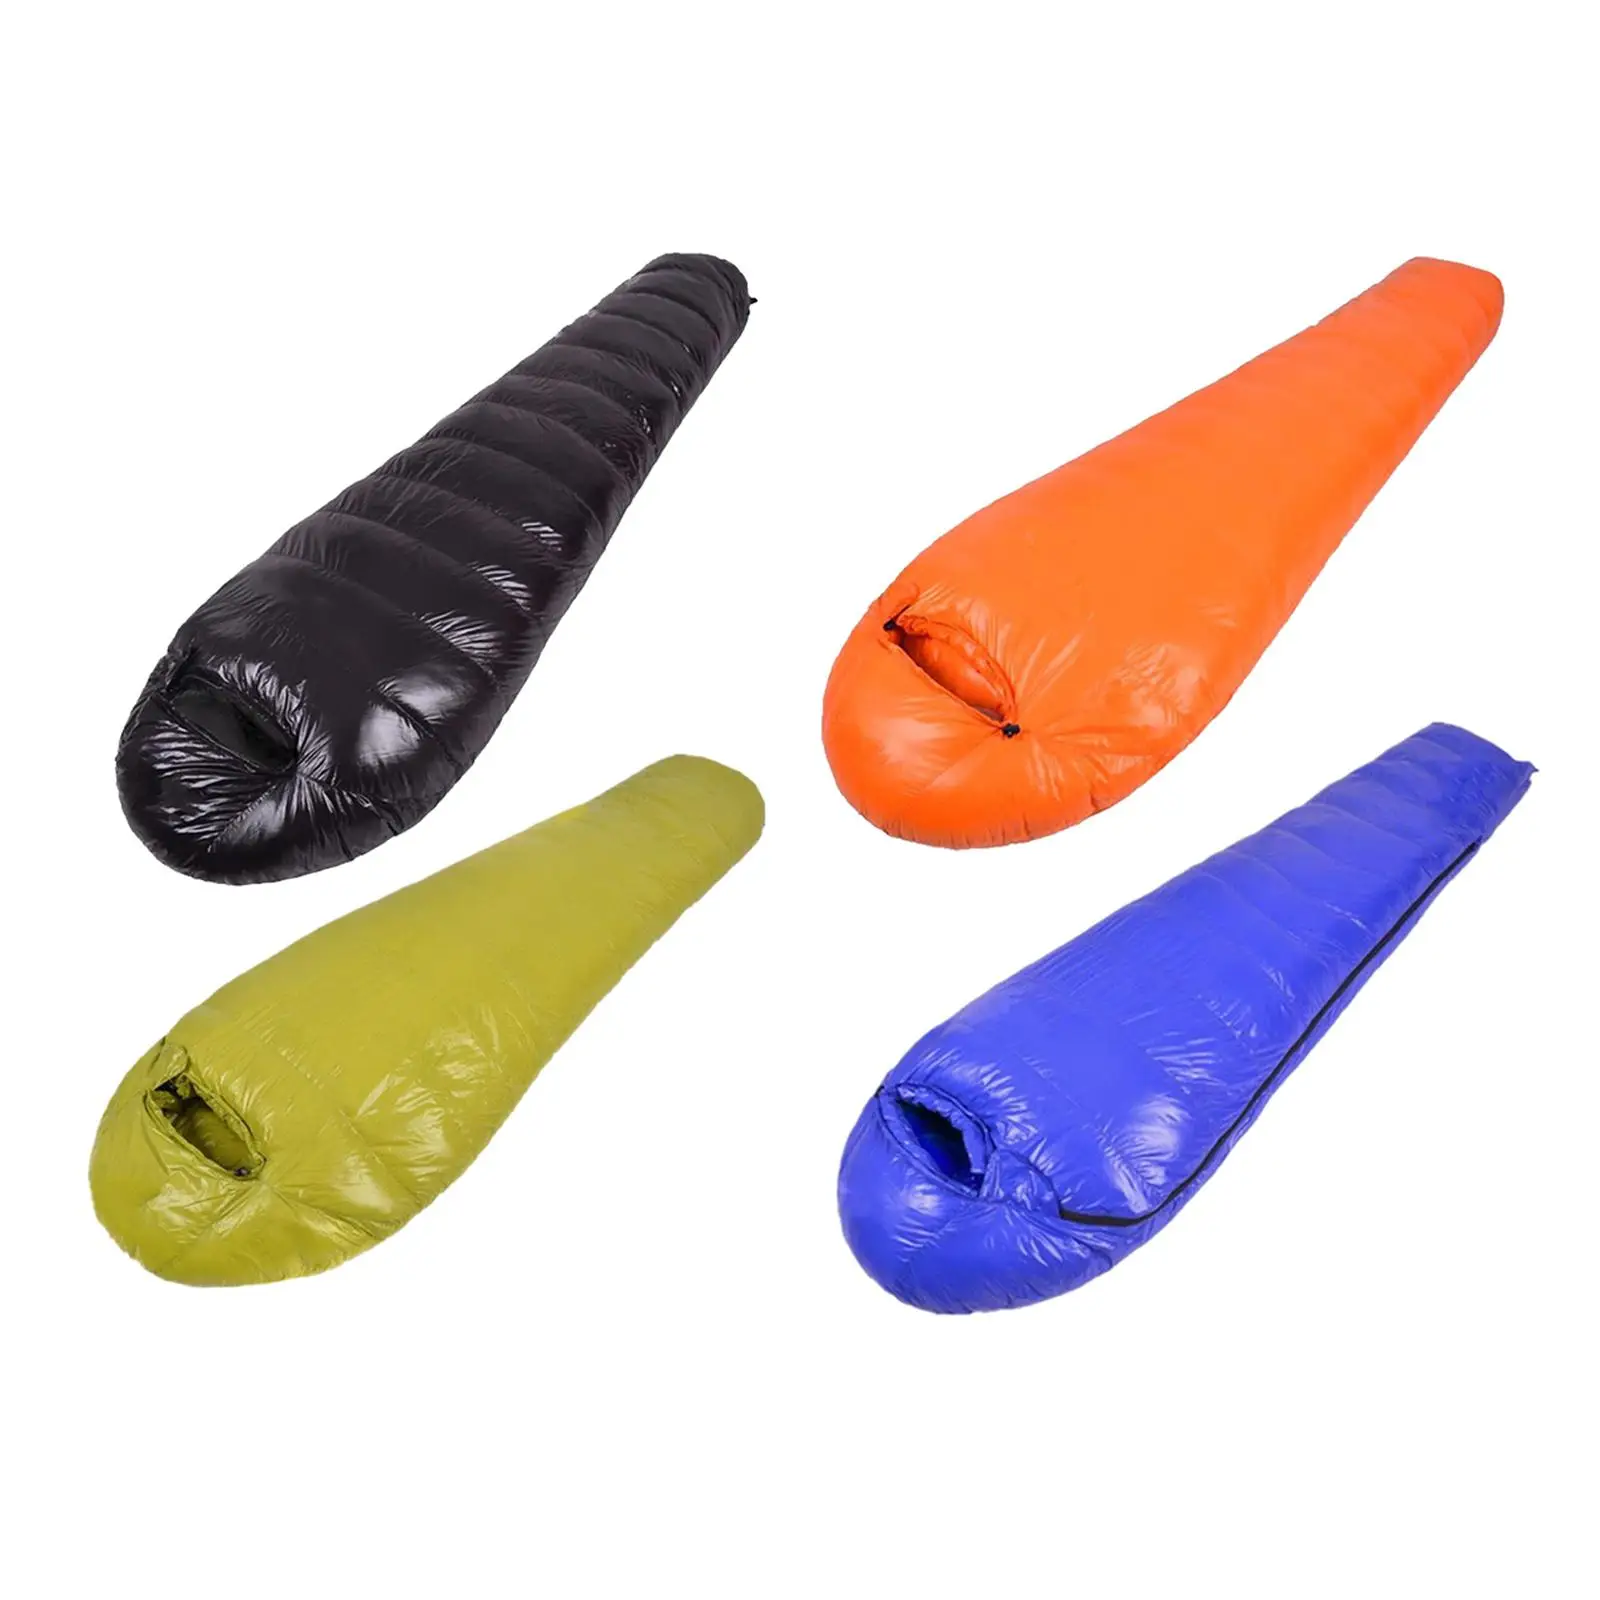 Portable Sleeping Bag Waterproof Mummy Style Sleeping  for  Tent Outdoor Cold Weather